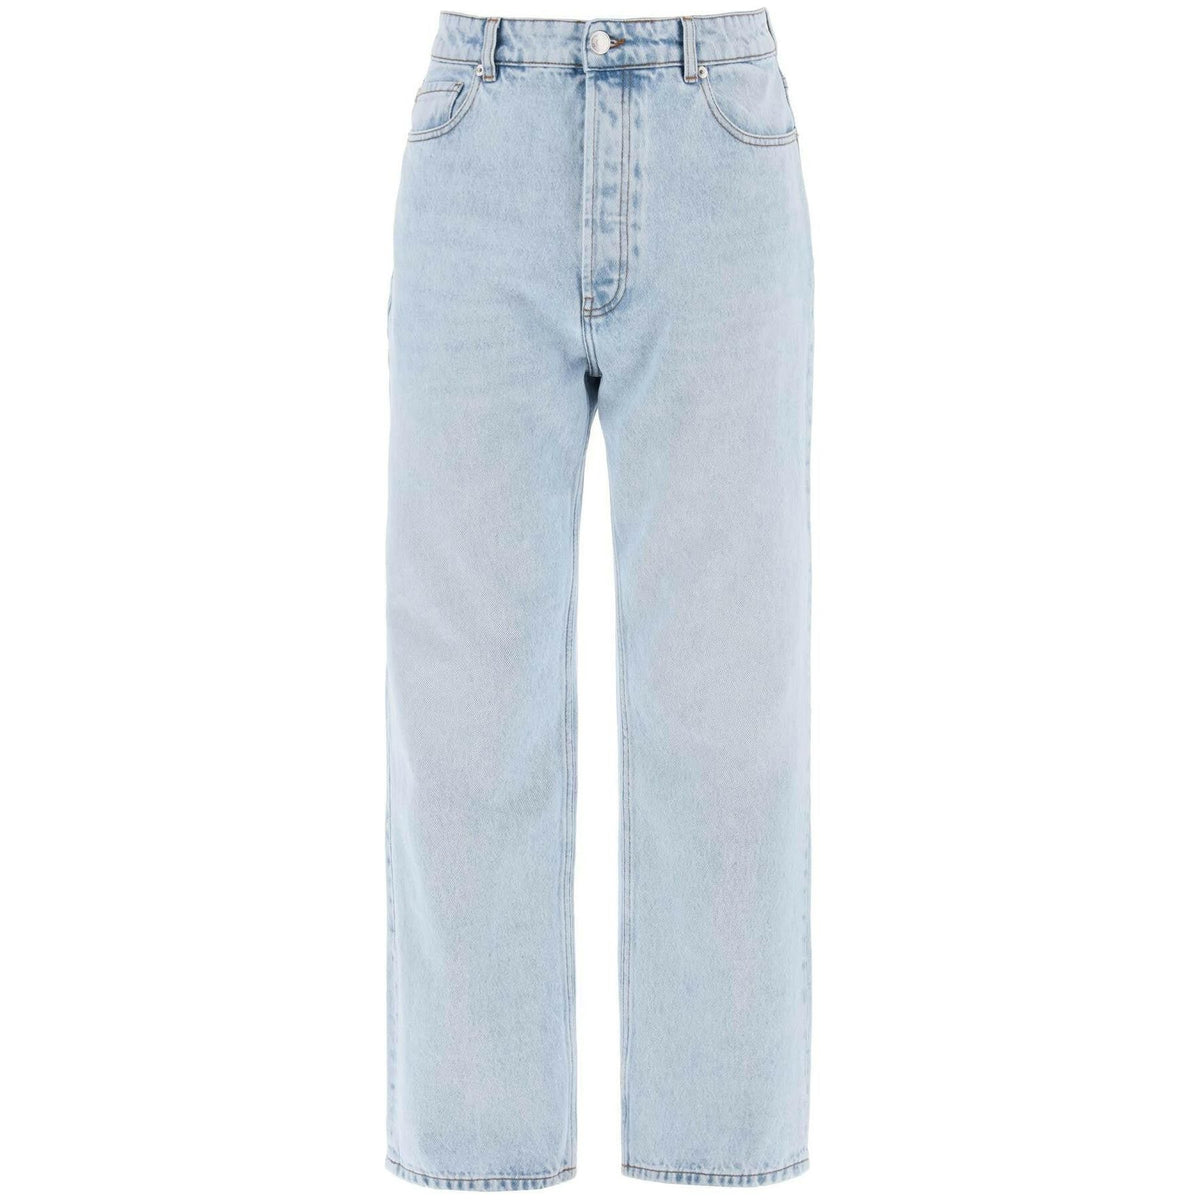 Classic Relaxed Fit Denim Jeans